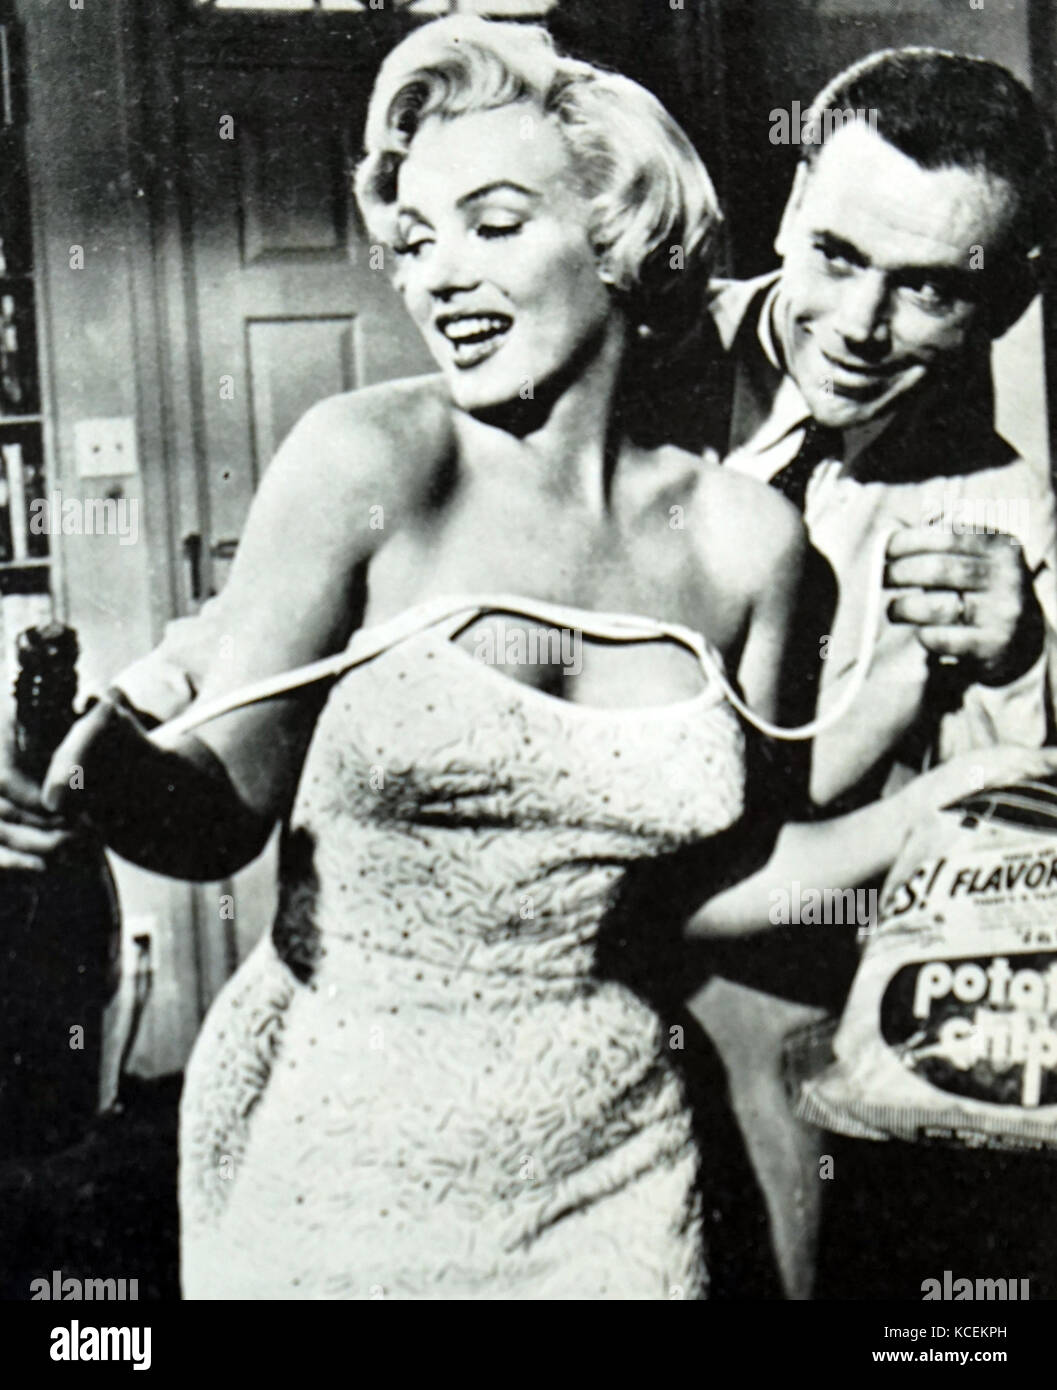 Film still from 'The Seven Year Itch' starring Marilyn Monroe (1926-1962) an American actress and Tom Ewell (1909-1994) an American film, stage and television Actor. Dated 20th Century Stock Photo